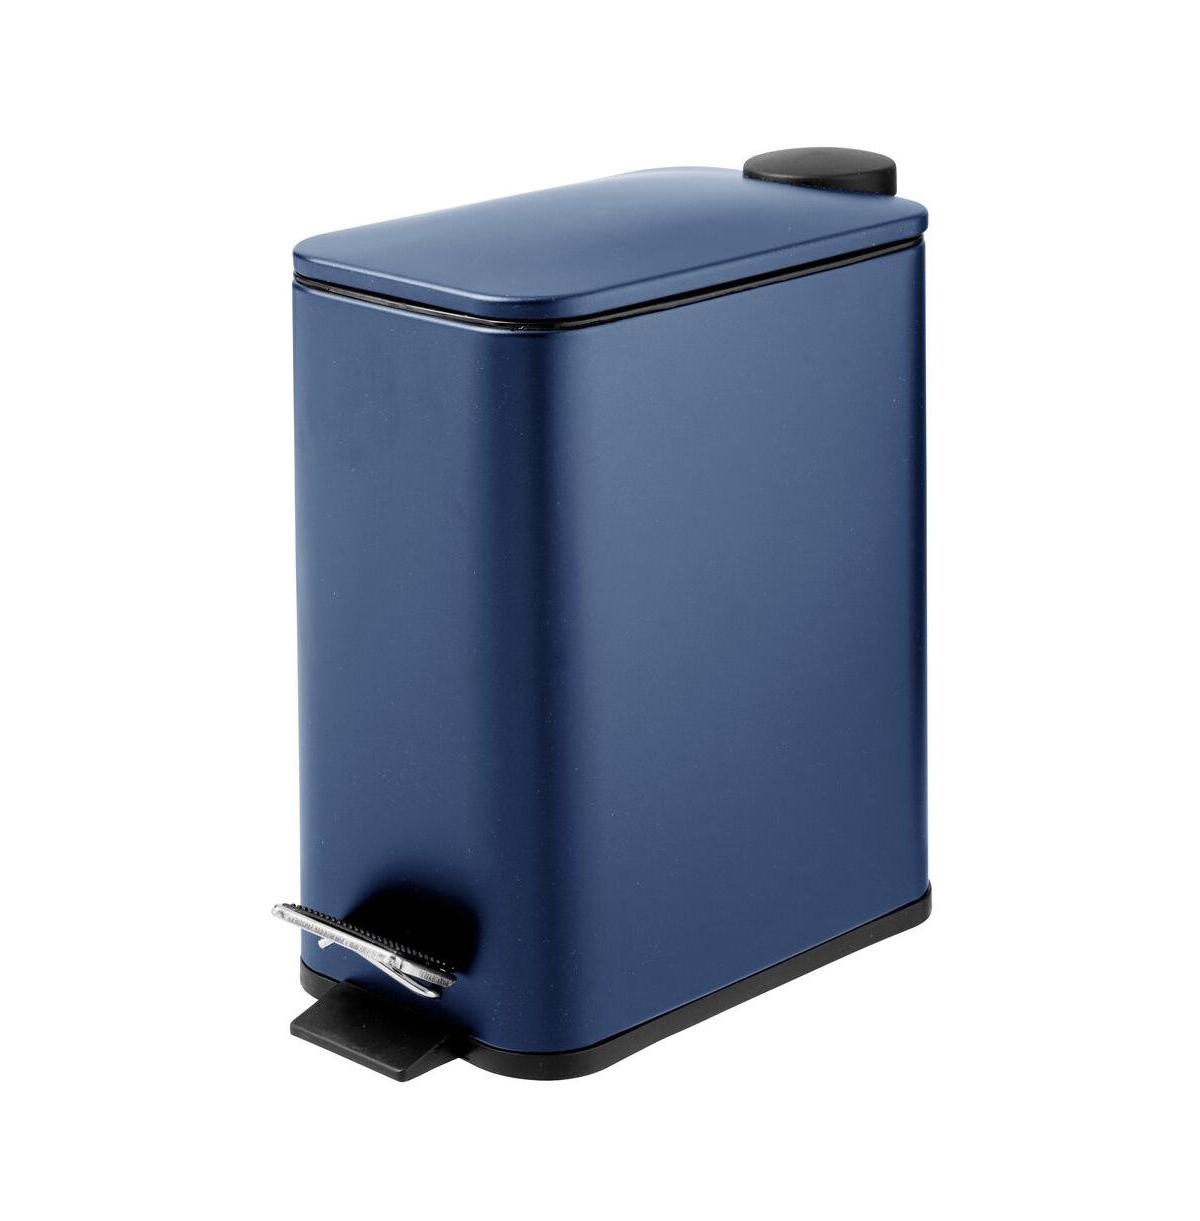 Slim Metal 1.3 Gallon Step Trash Can with Lid/Liner Bucket - Navy Blue - Navy